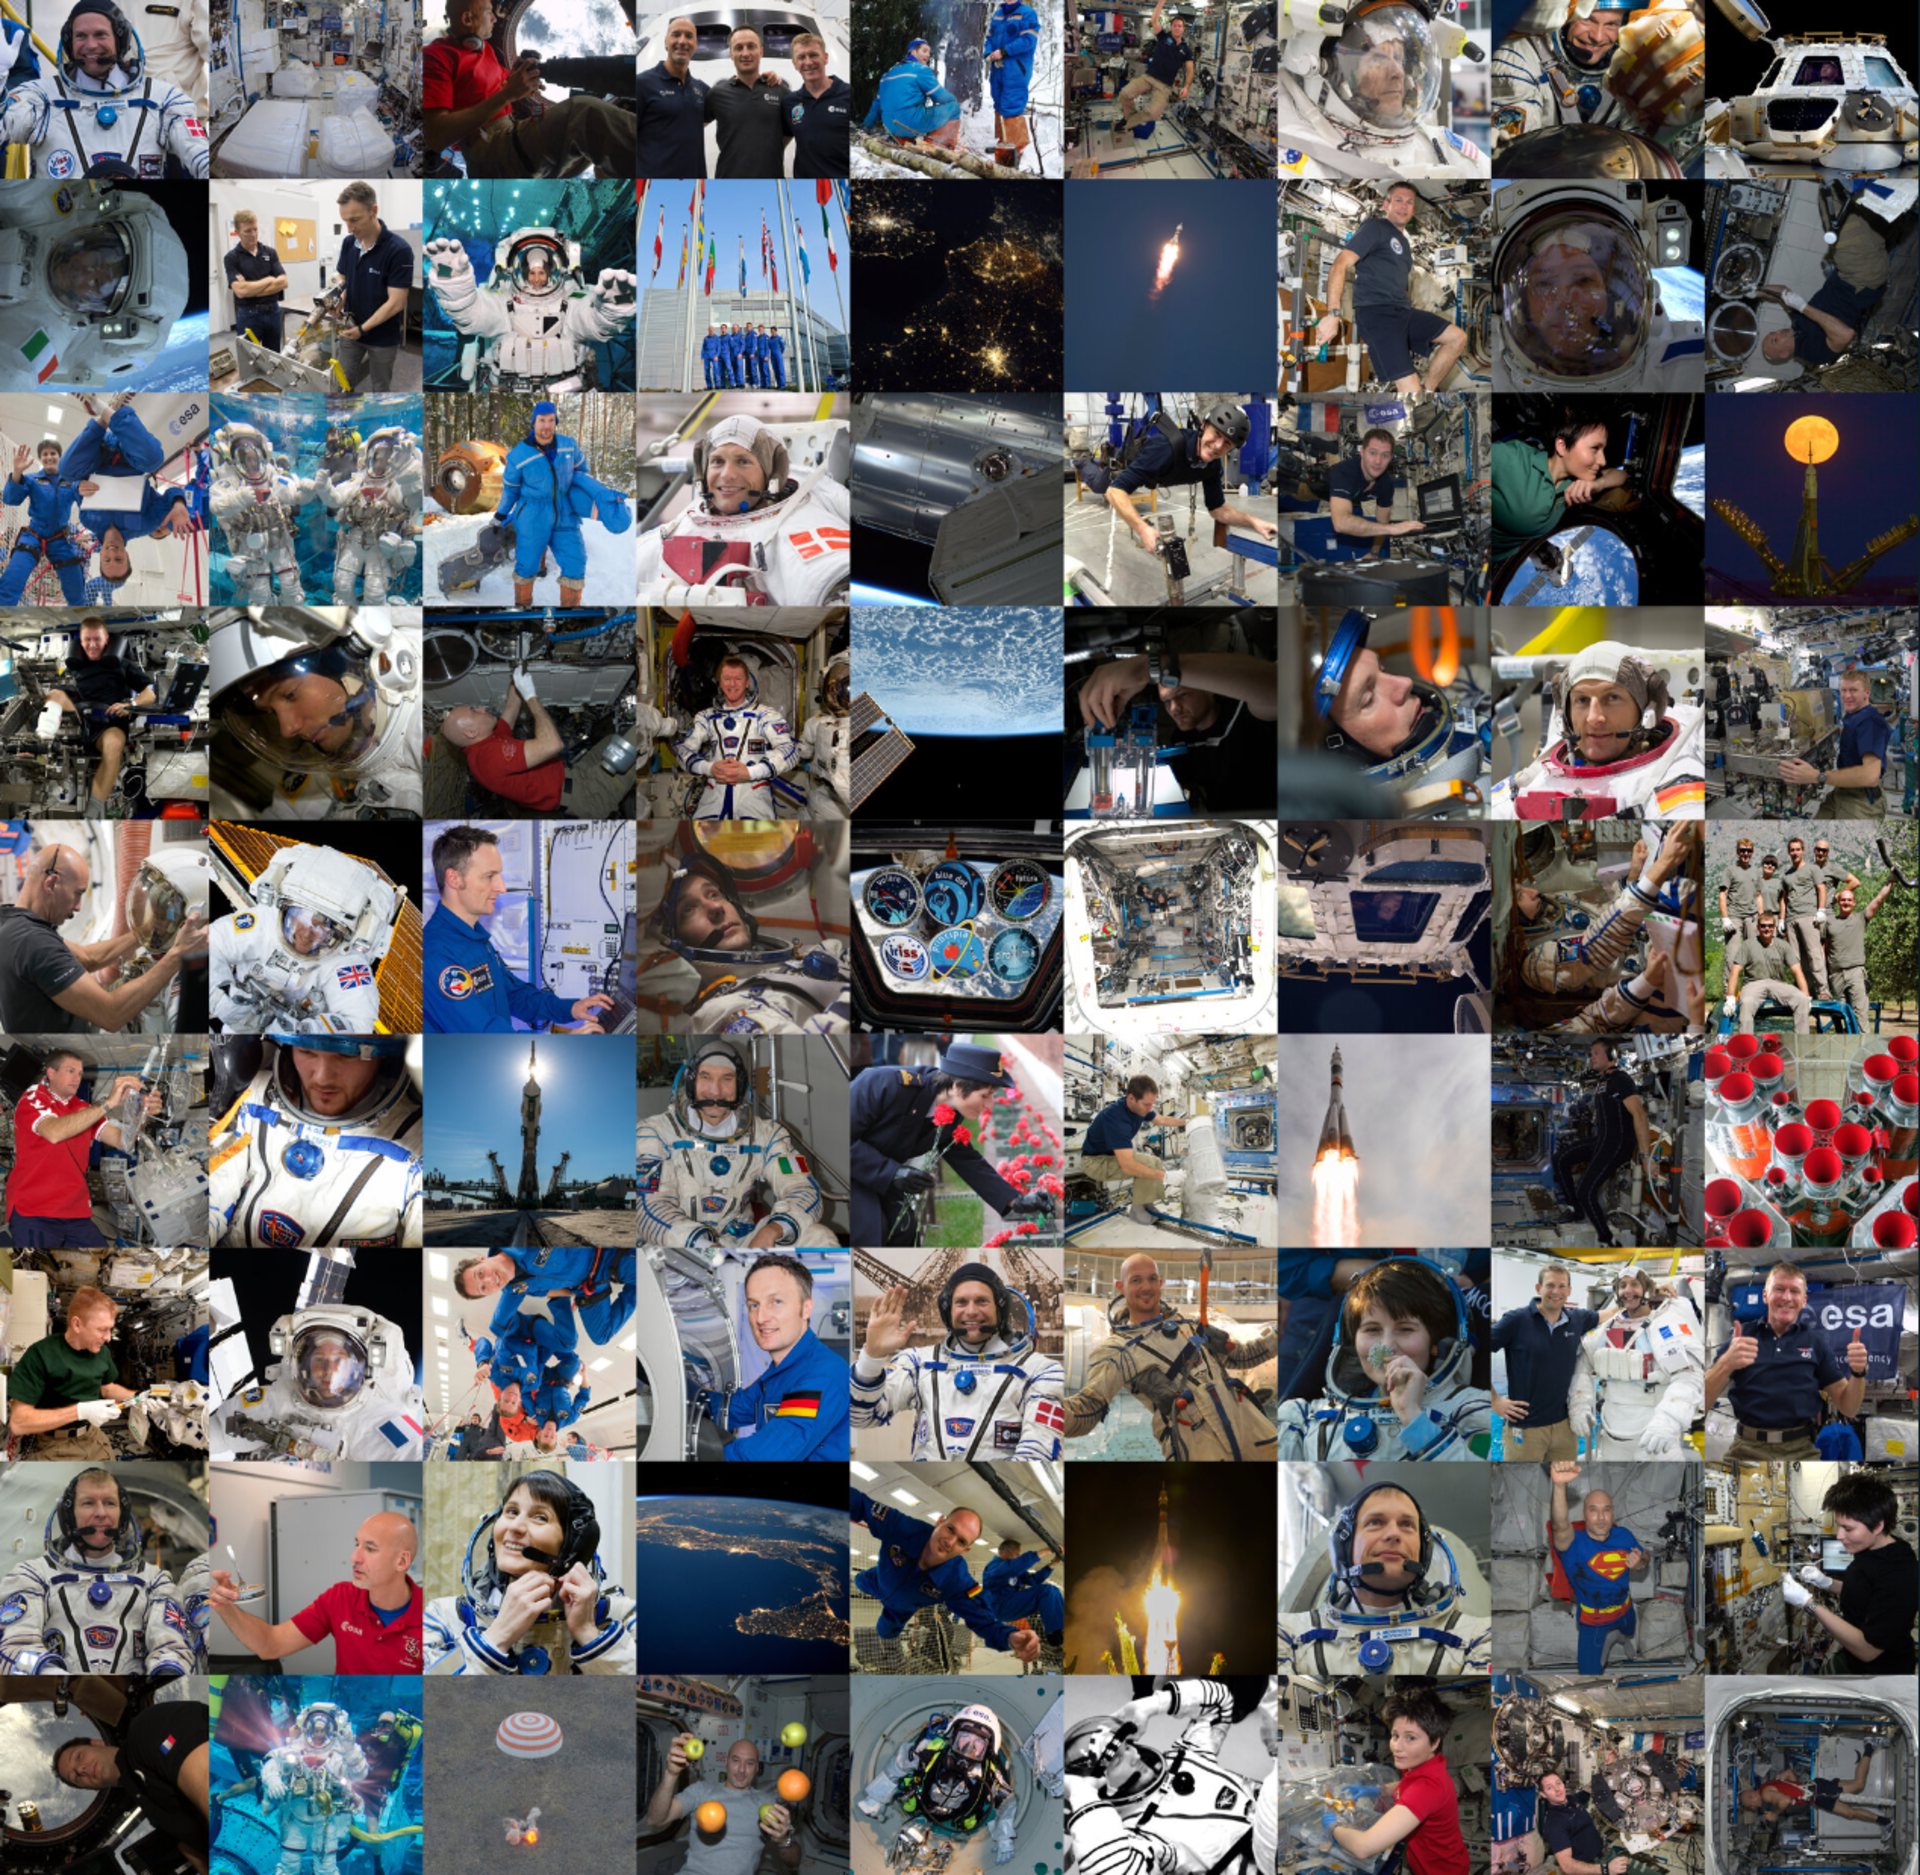 Europe’s astronaut selection – are you ready to launch your career?